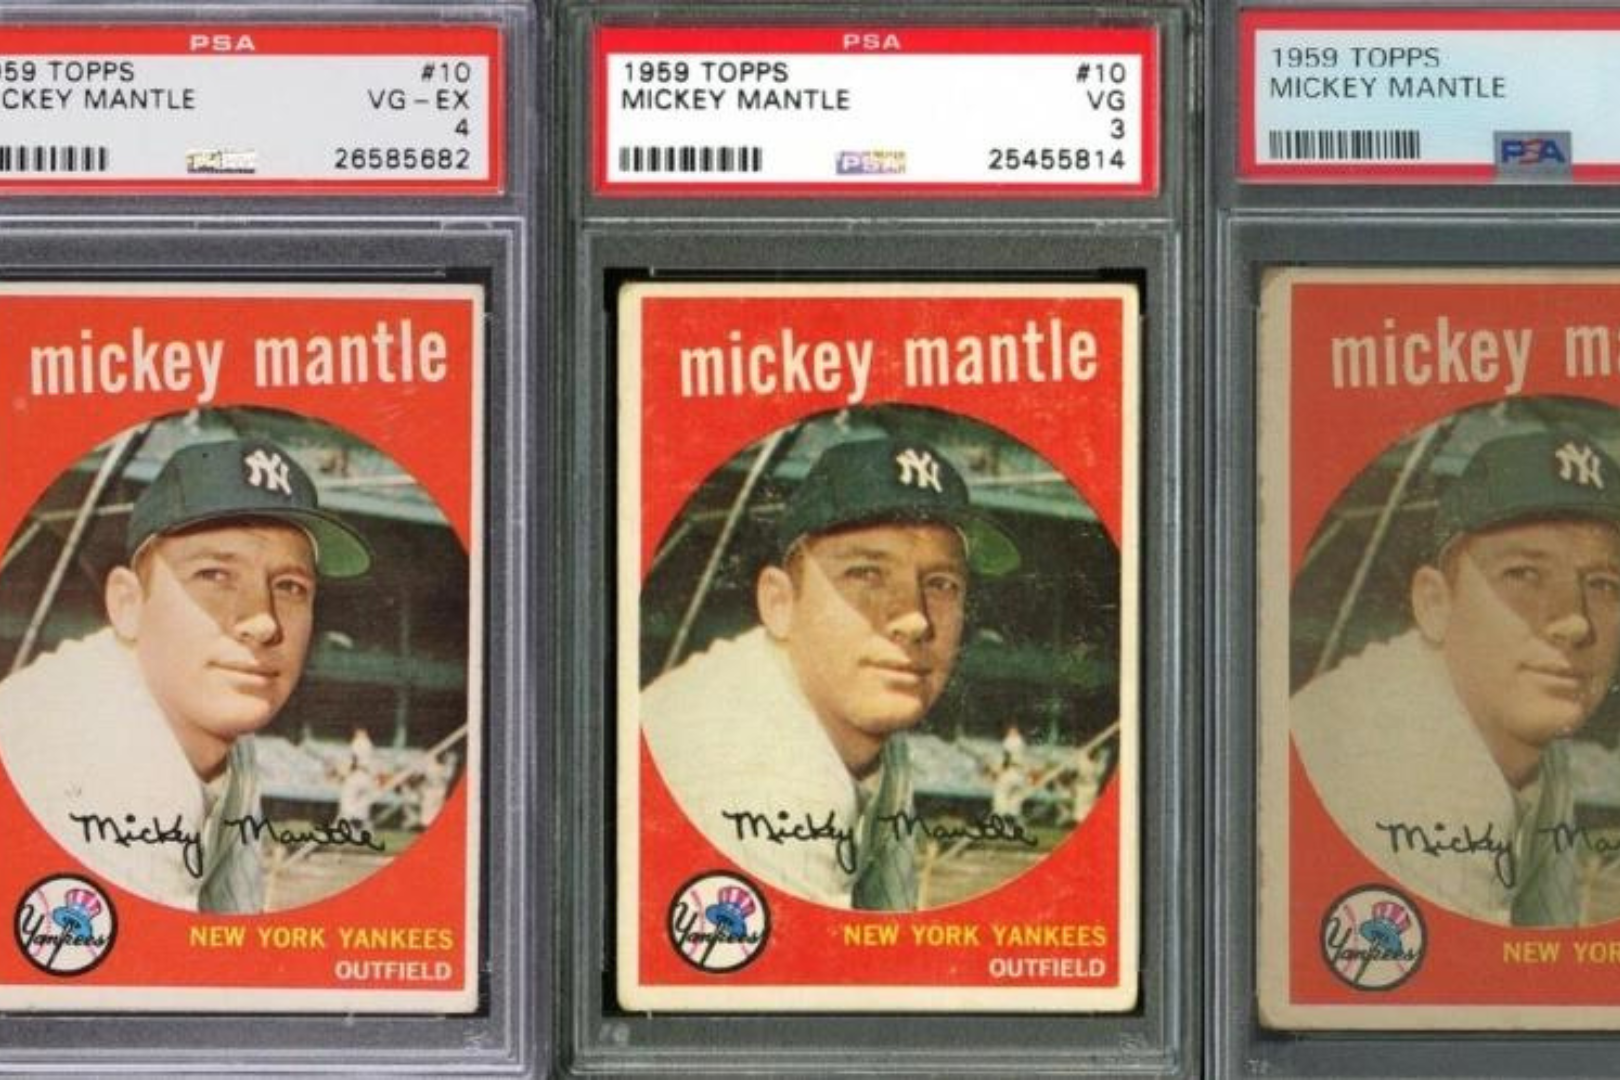 1952 Mantle Baseball Card Sells for Record $12.6 Million - Antique Trader